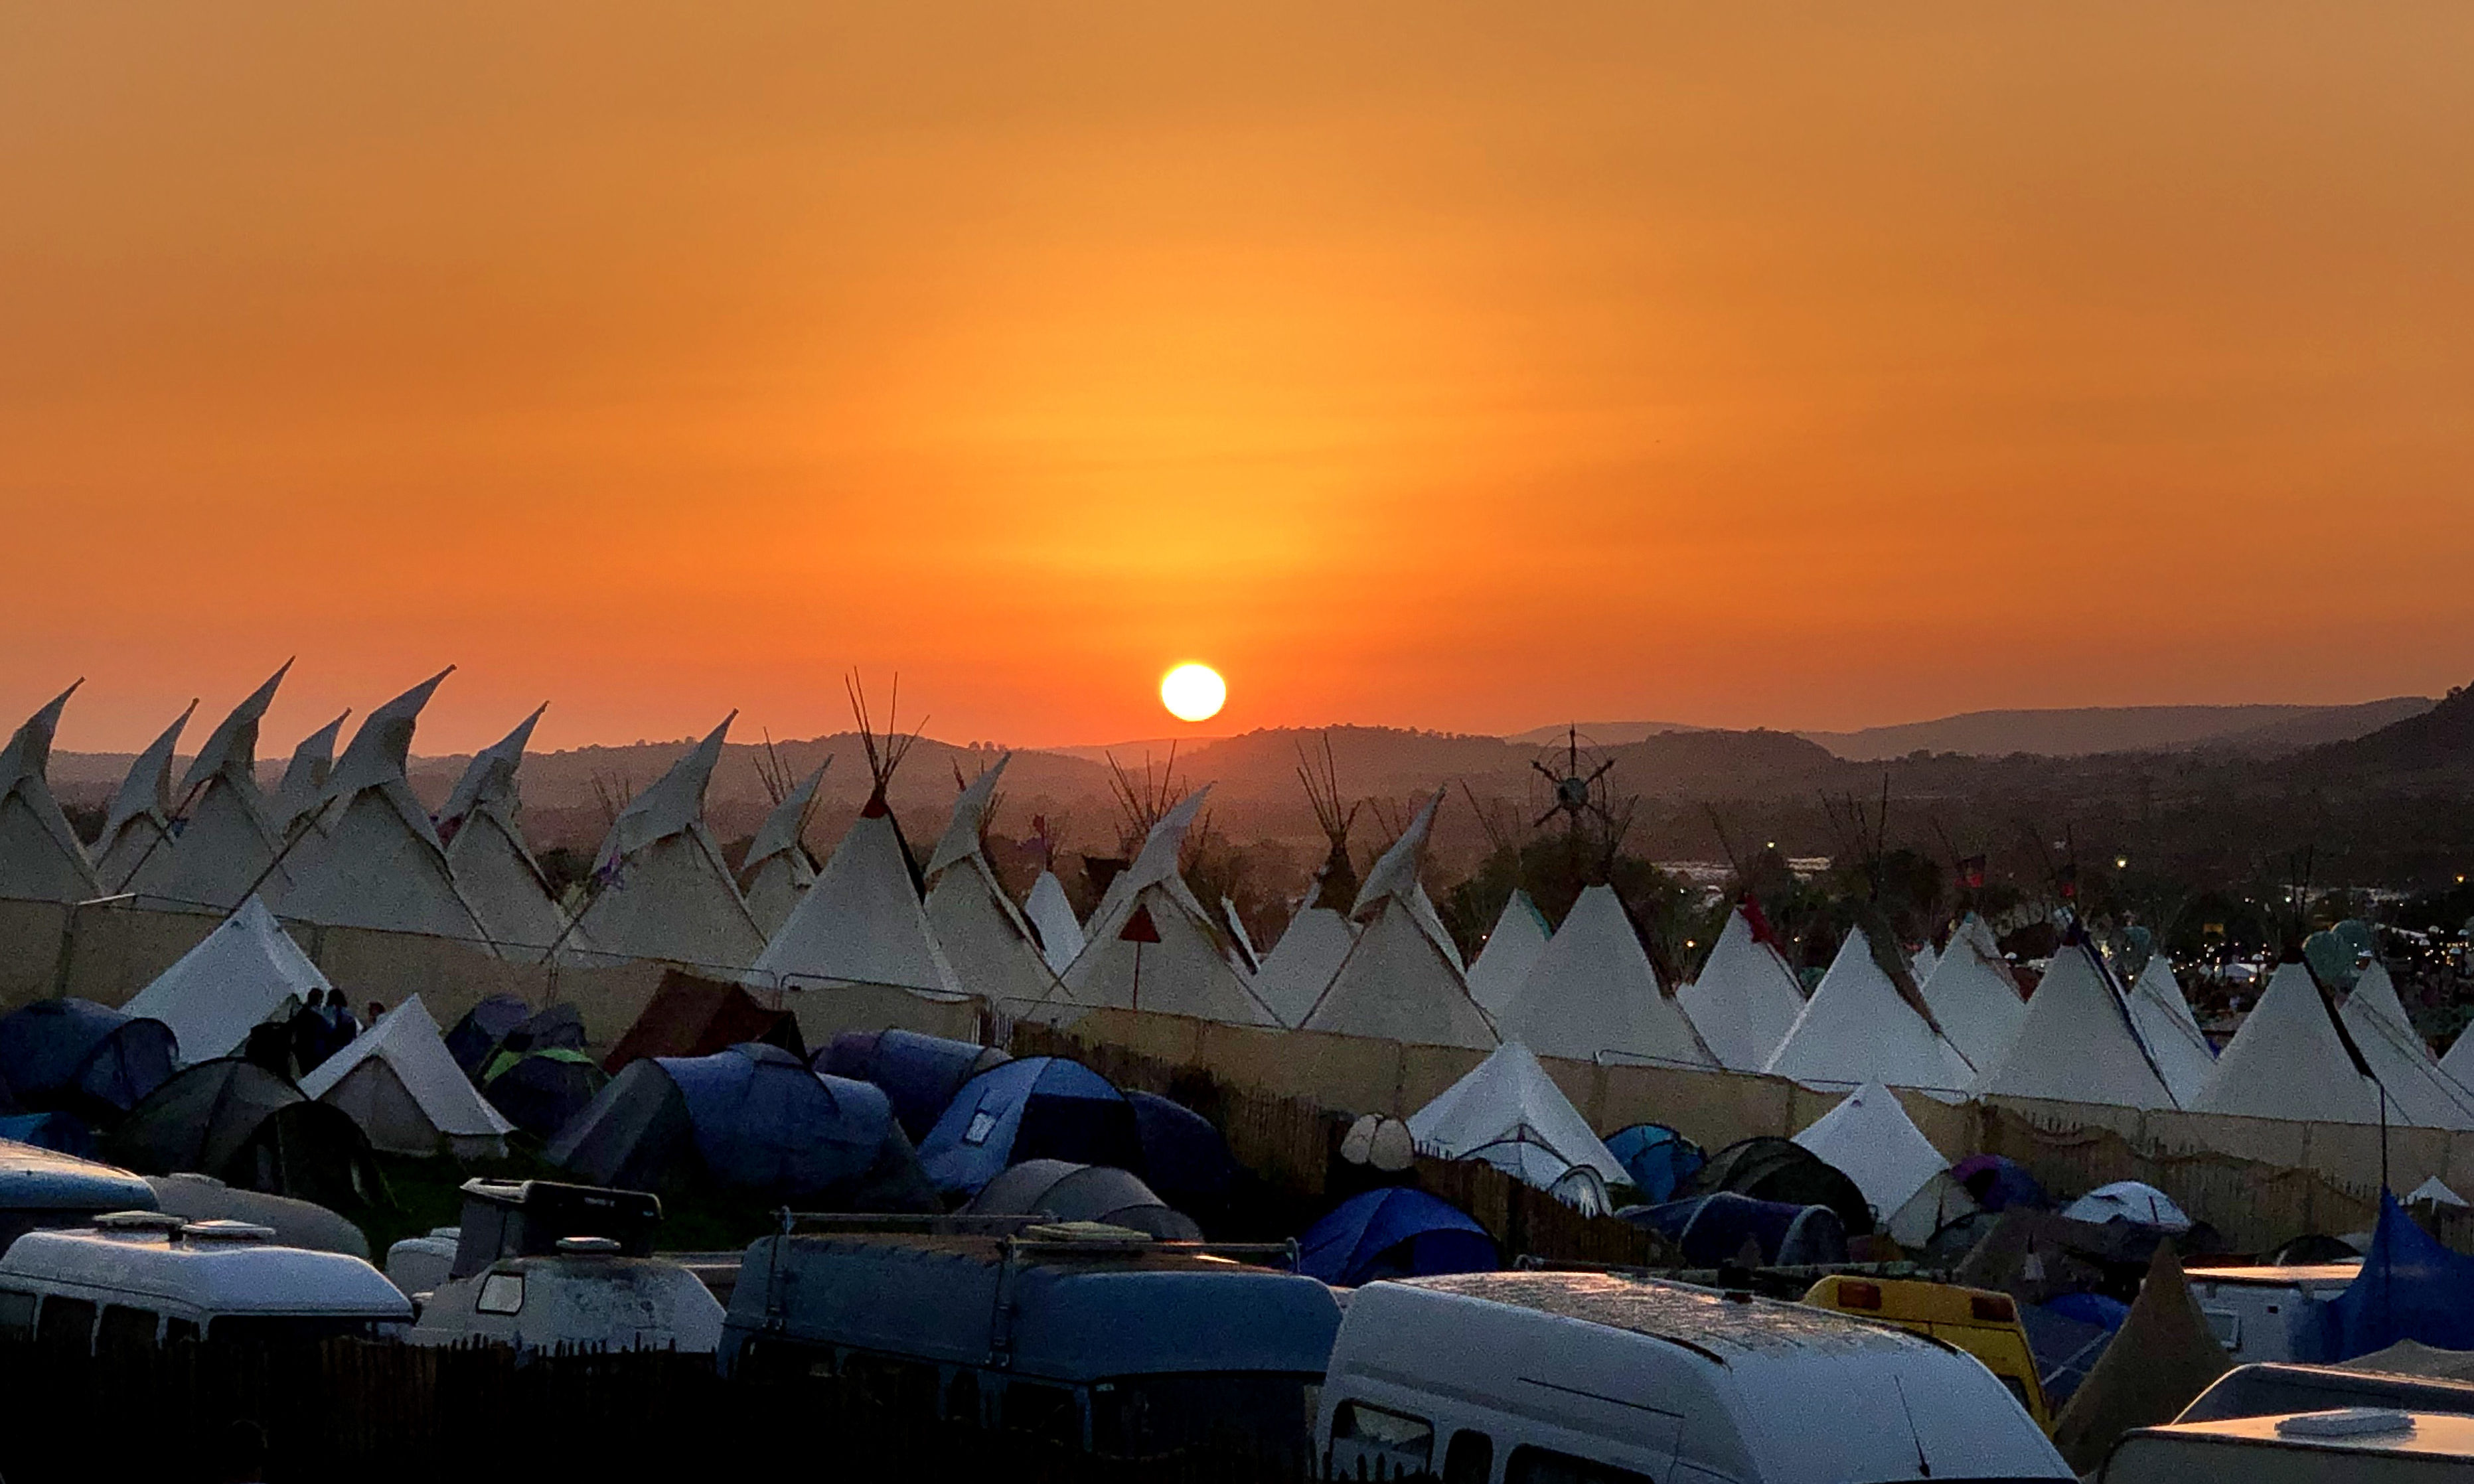 Festival goers watch the sunset during day two of Glastonbury Festival at Worthy Farm, Pilton on June 27, 2019 in Glastonbury, England.